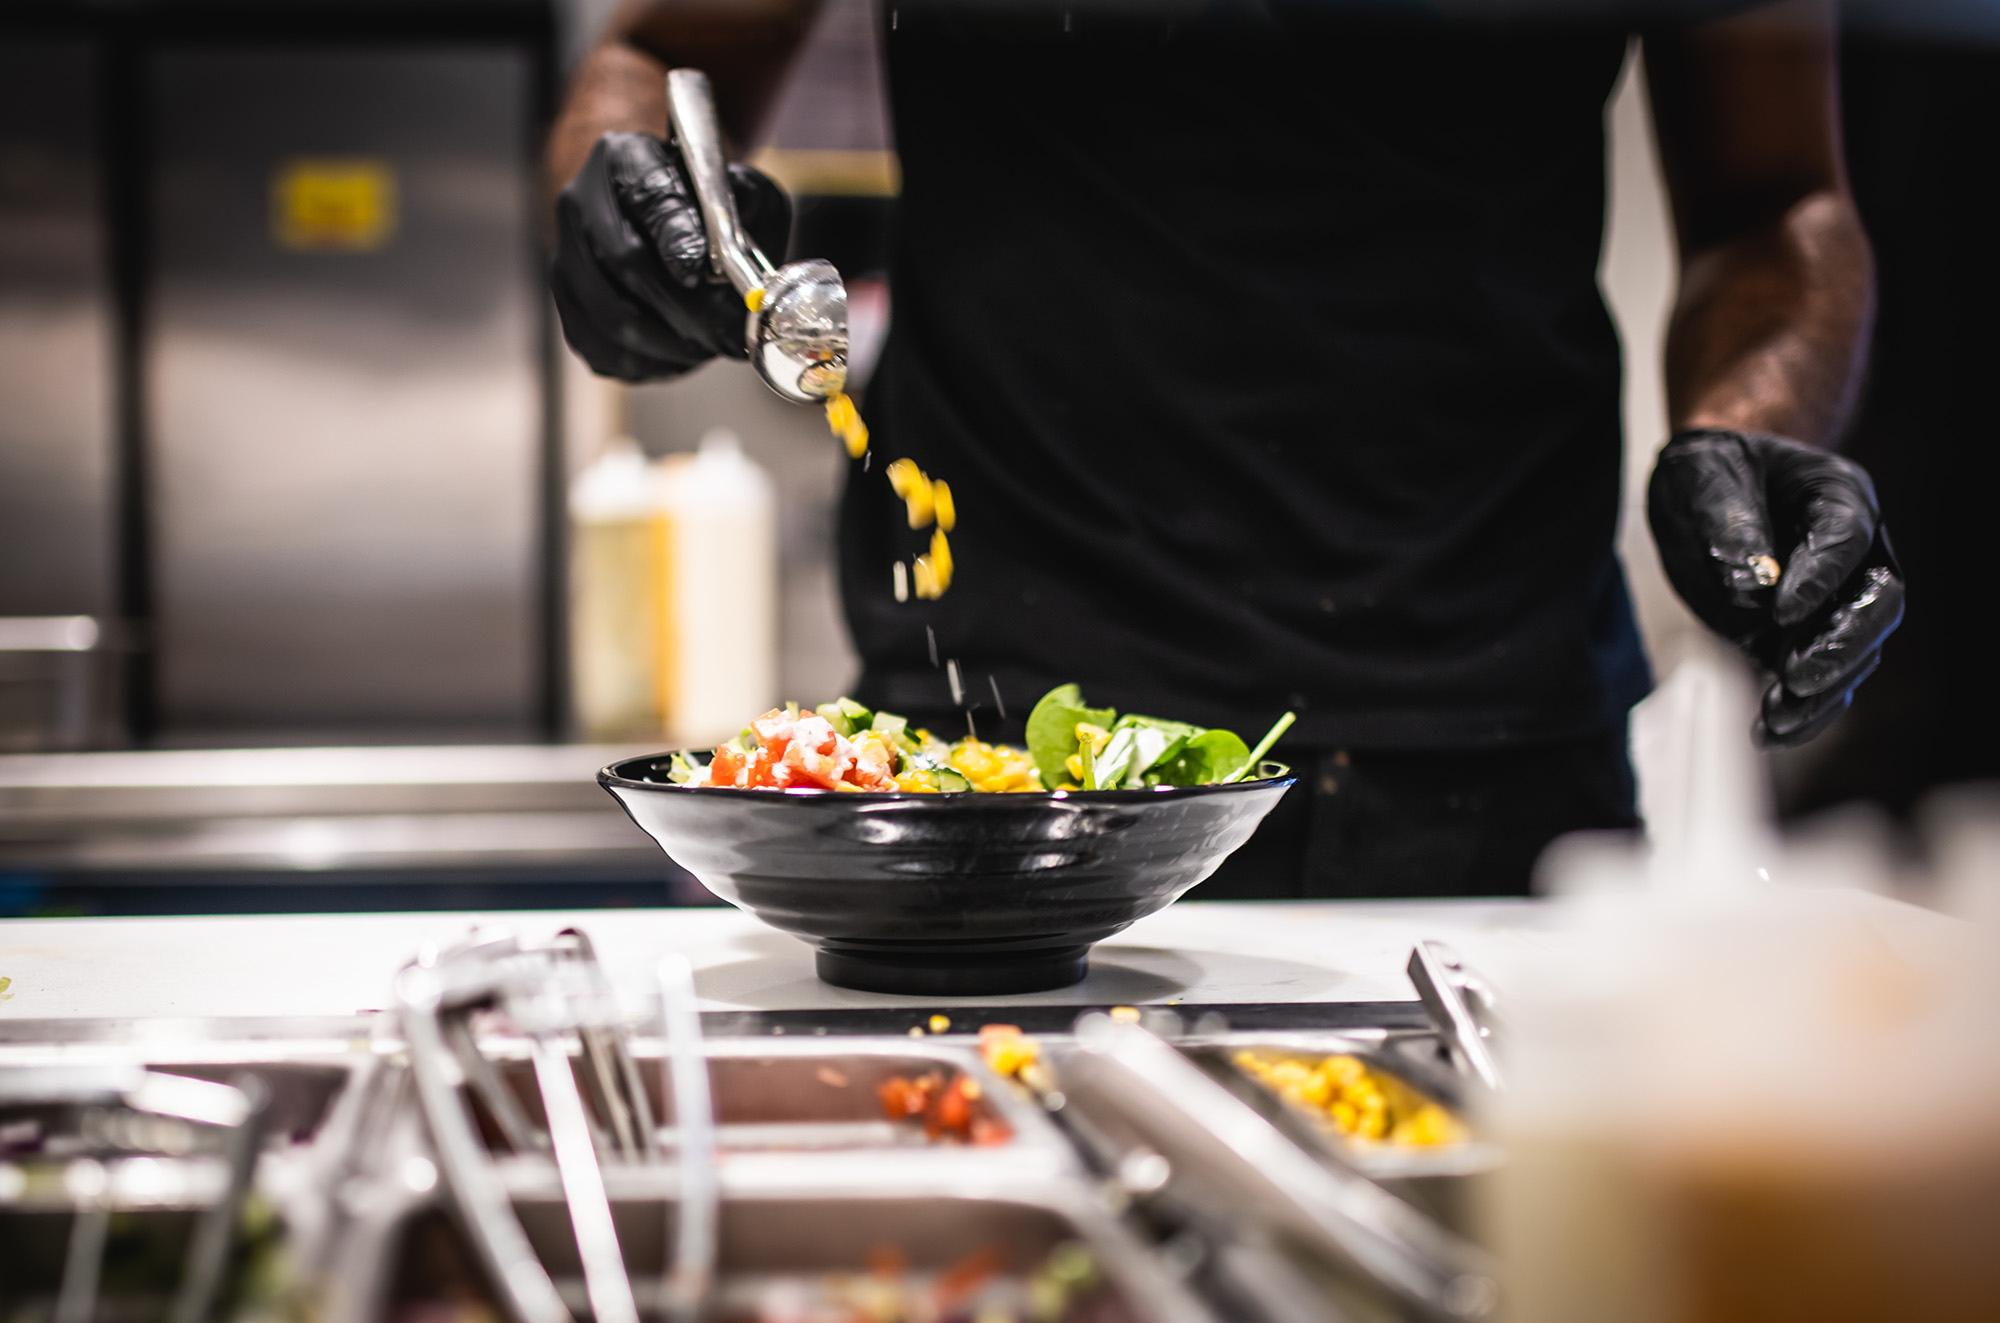 Photo: a Halal Shack bowl of tomatoes, zucchini, corn, and lettuce is shown being made by a worker dressed in all black in a large black bowl.